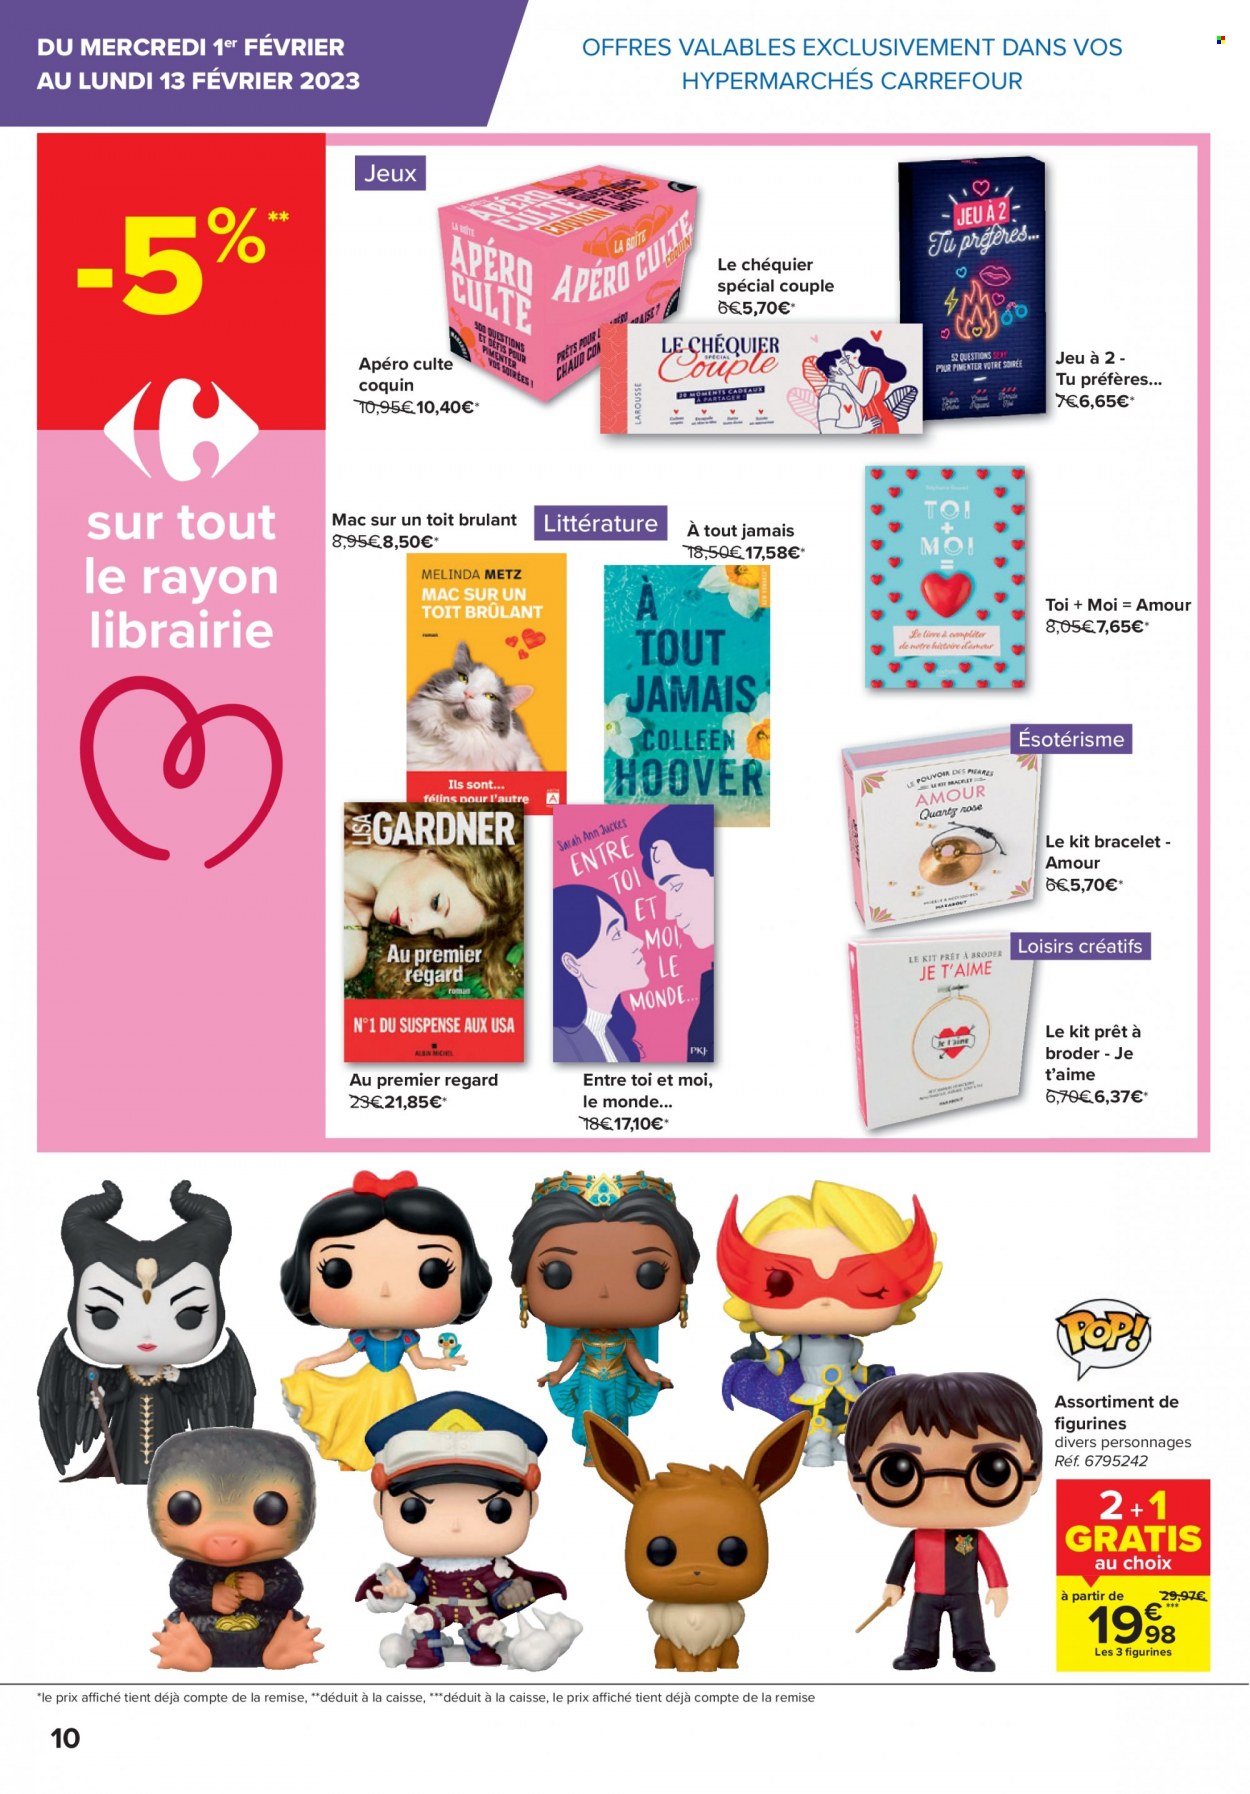 Catalogue Carrefour hypermarkt - 1.2.2023 - 13.2.2023. Page 10.